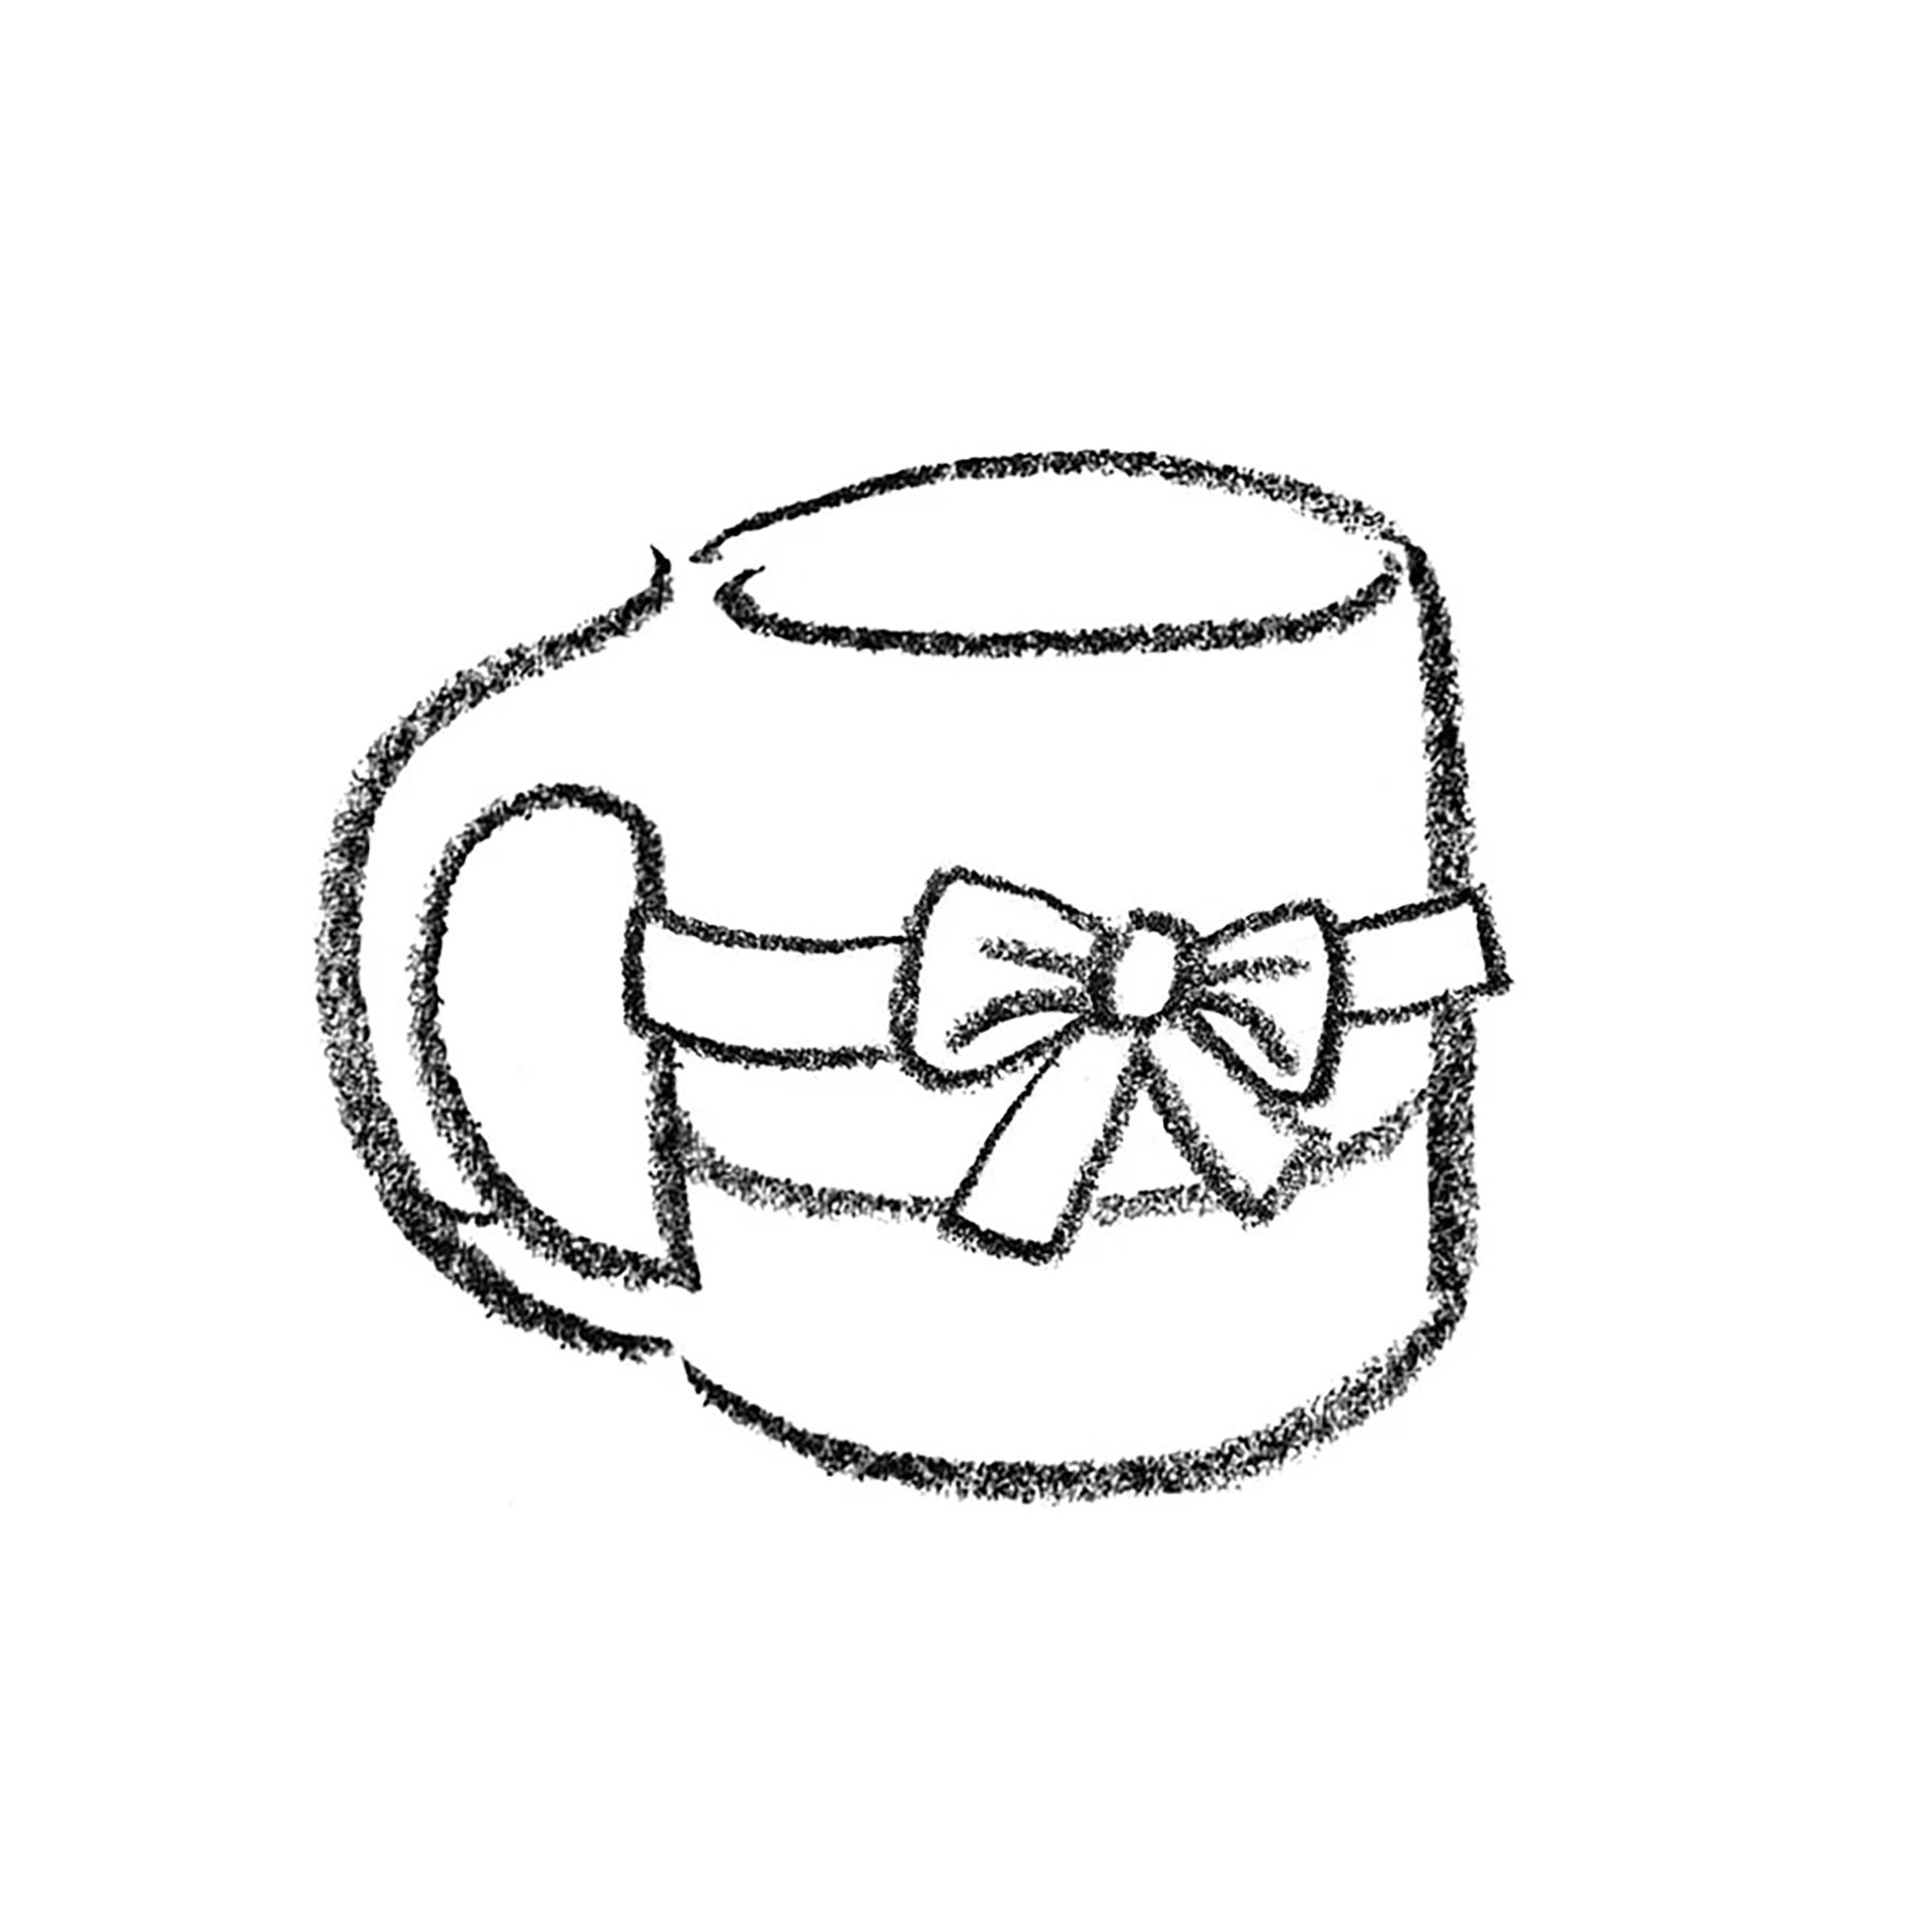 crayon drawing of a mug with a bow tied around